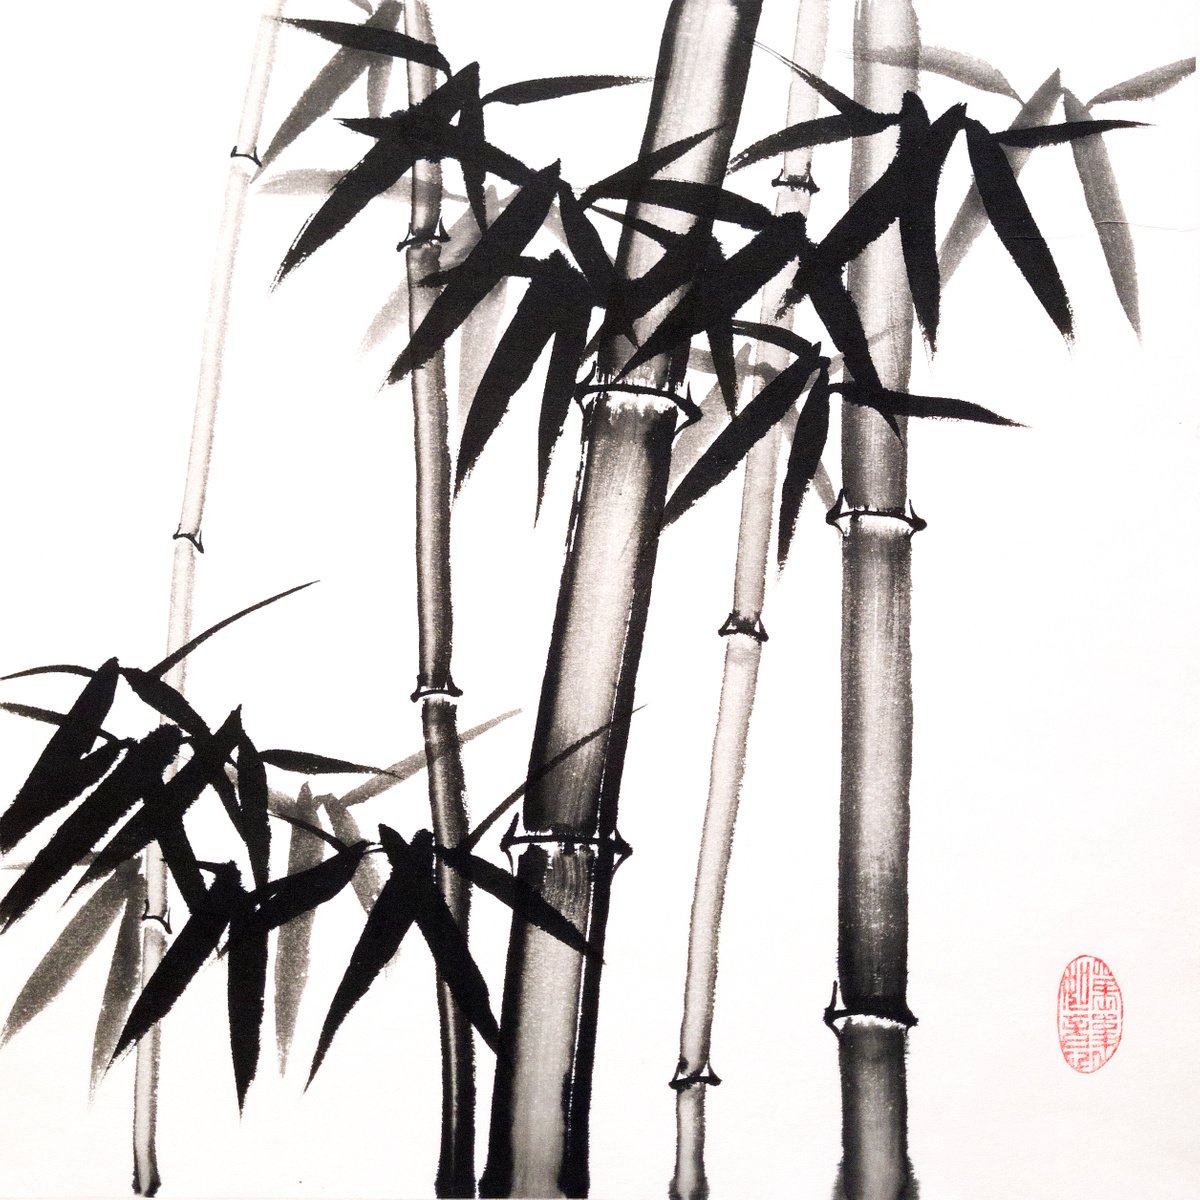 Bamboo forest - Bamboo series No. 2120 - Oriental Chinese Ink Painting by Ilana Shechter